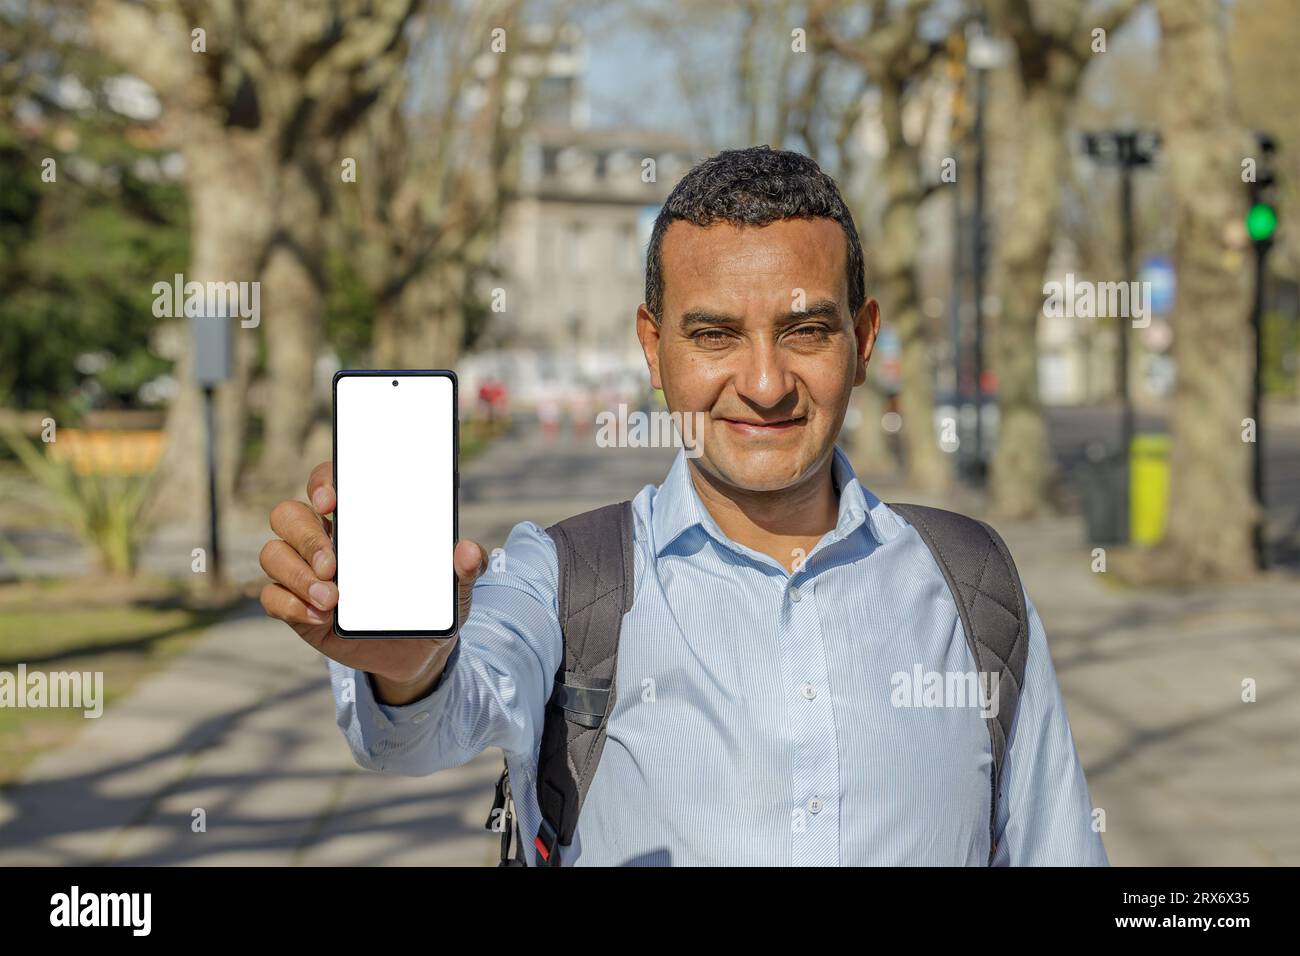 Latin man in a city shows the screen of his mobile phone. Stock Photo